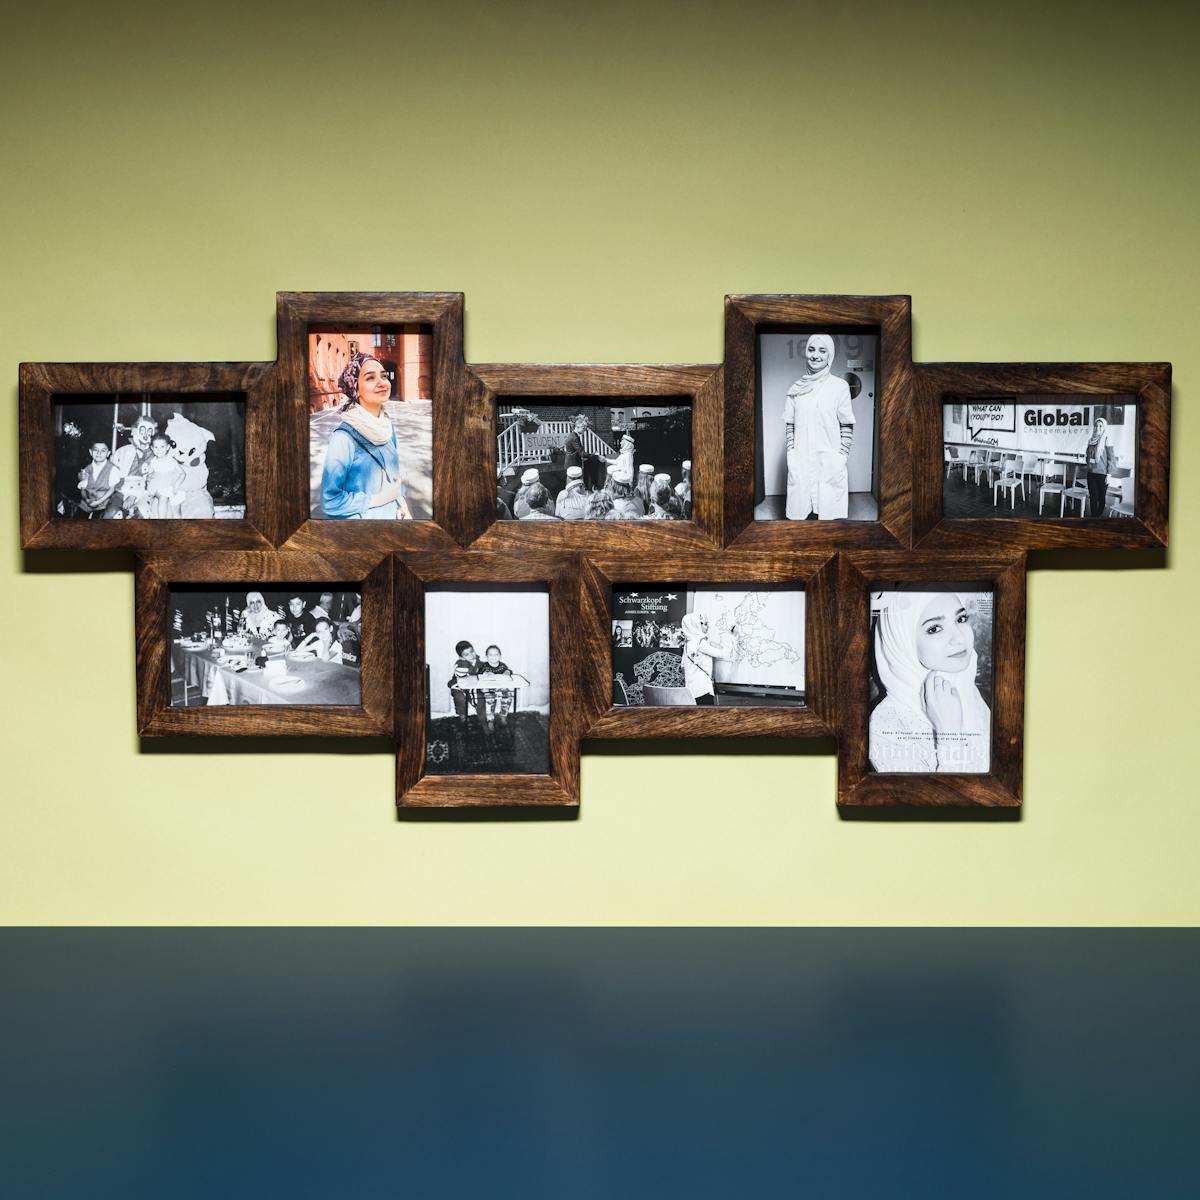 Photograph of a multi-frame photo frame containing nine photographs, eight in colour and one in black and white. The frame is hung on a light green coloured wall above a blue tabletop.